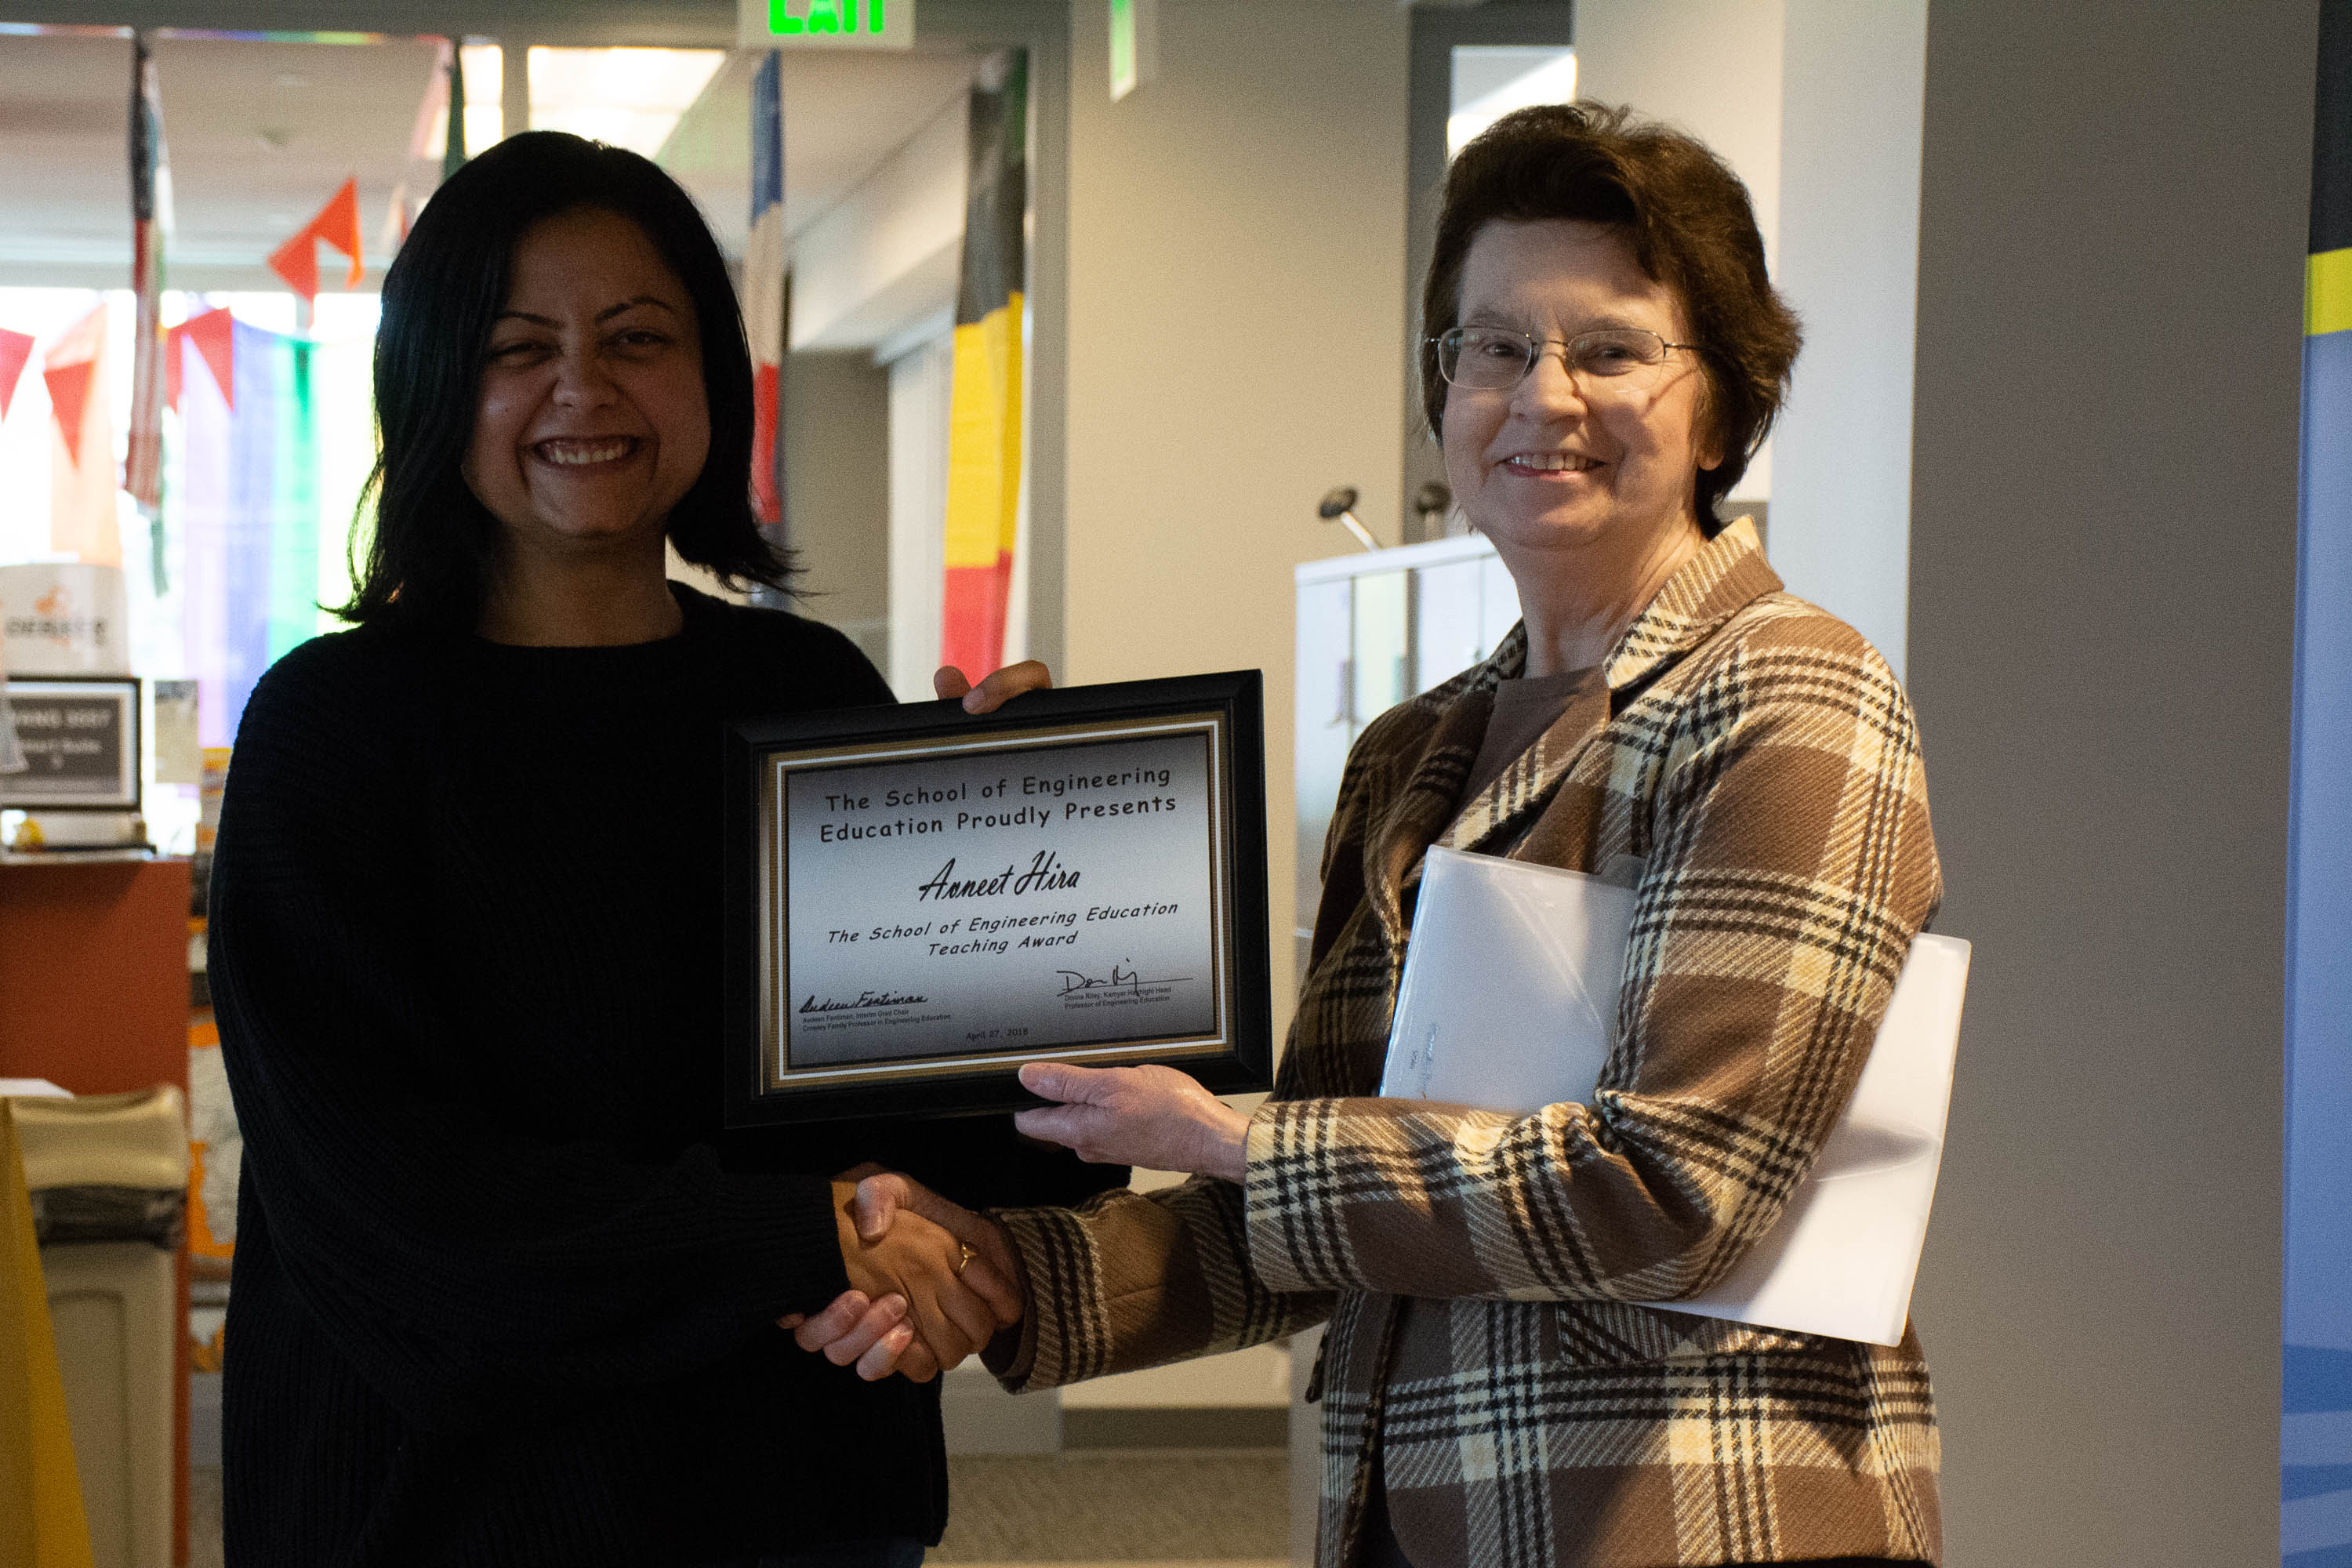 ENE also gives a teaching award acknowledging the outstanding educational contributions of our graduate students through teaching-related activities relevant to their role as a graduate student. This award, given this year to Avneet Hira, recognizes both the extent and quality of contributions.